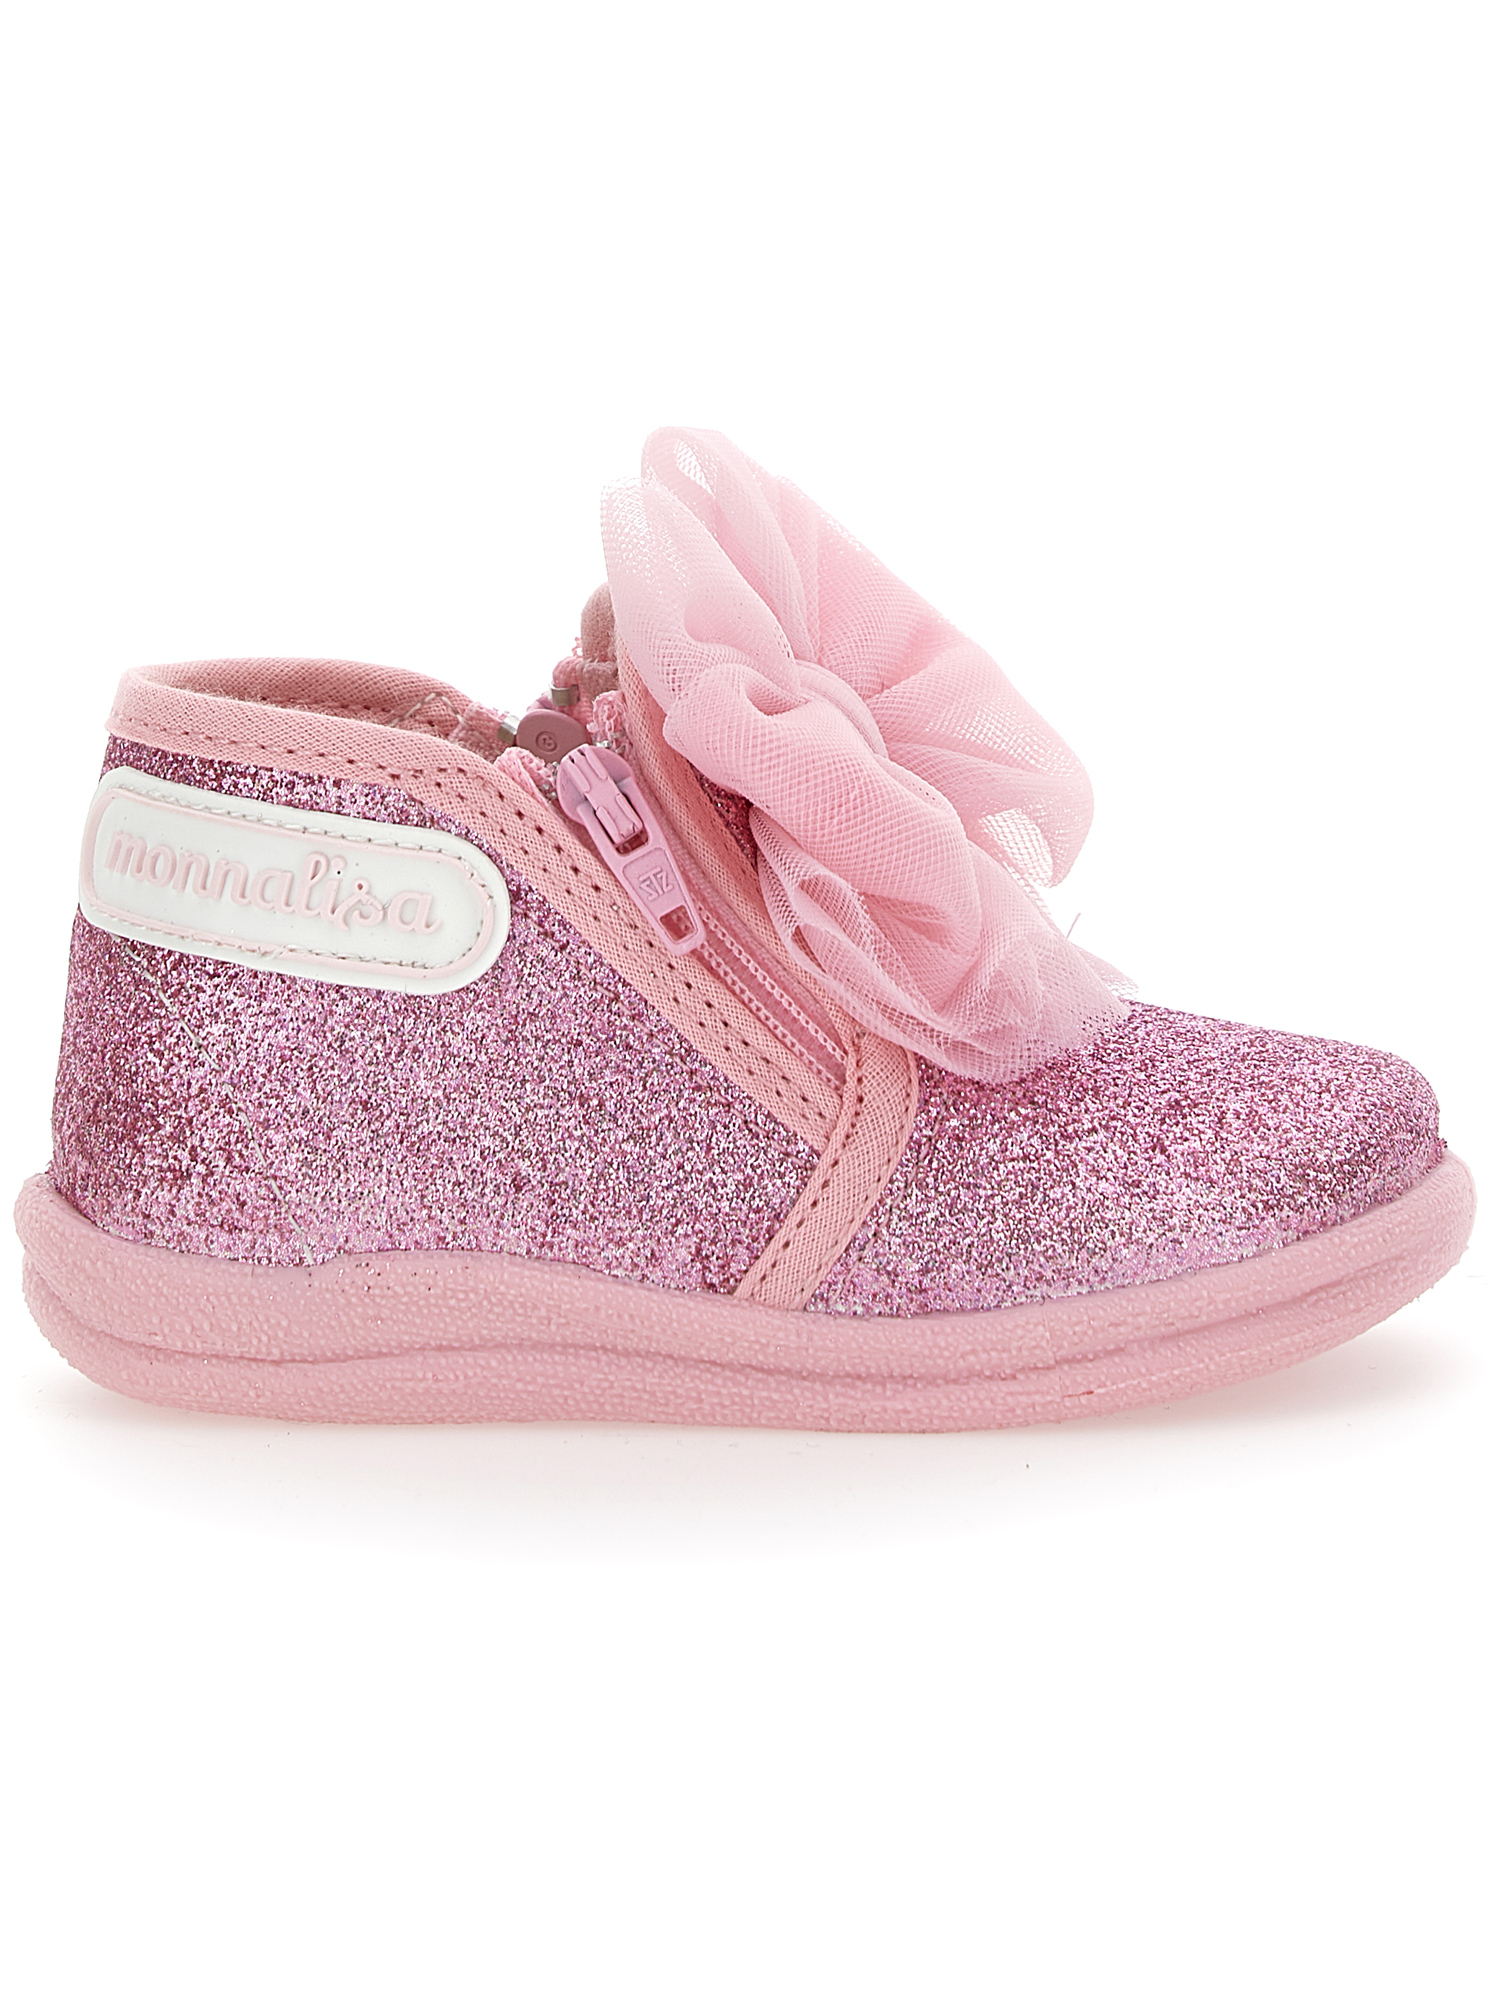 Monnalisa Glitter High Shoes With Bows In Dusty Pink Rose